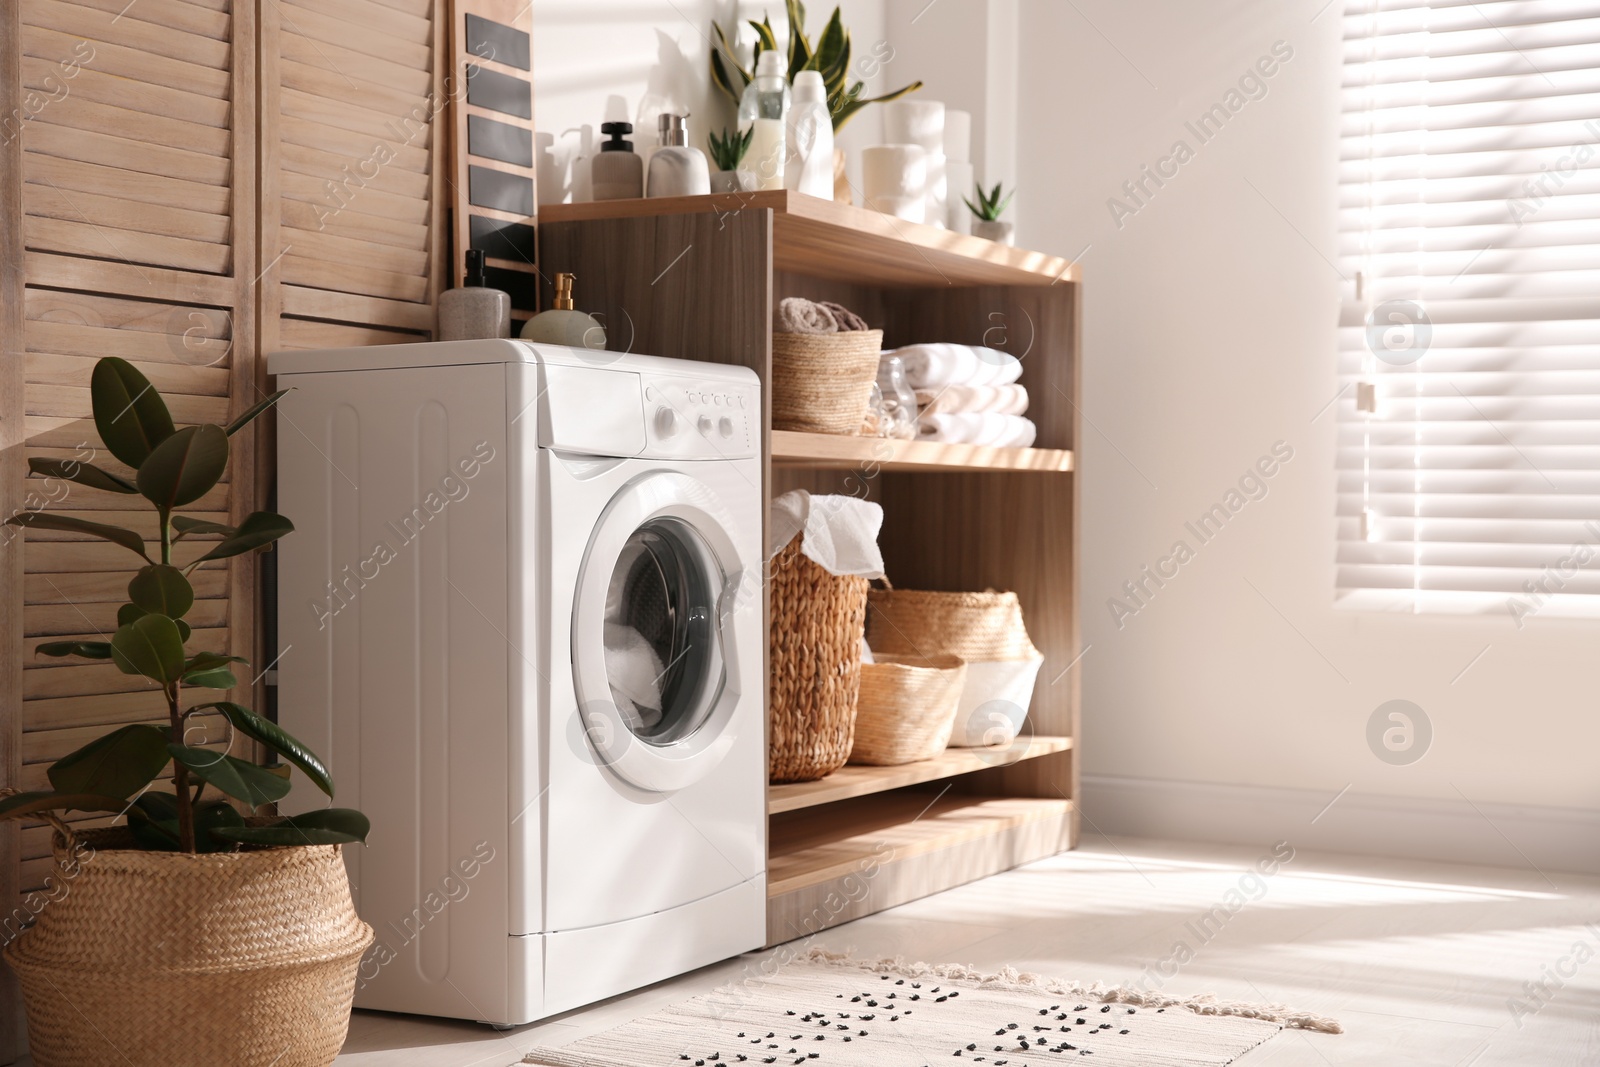 Photo of Modern washing machine and shelving unit in laundry room interior